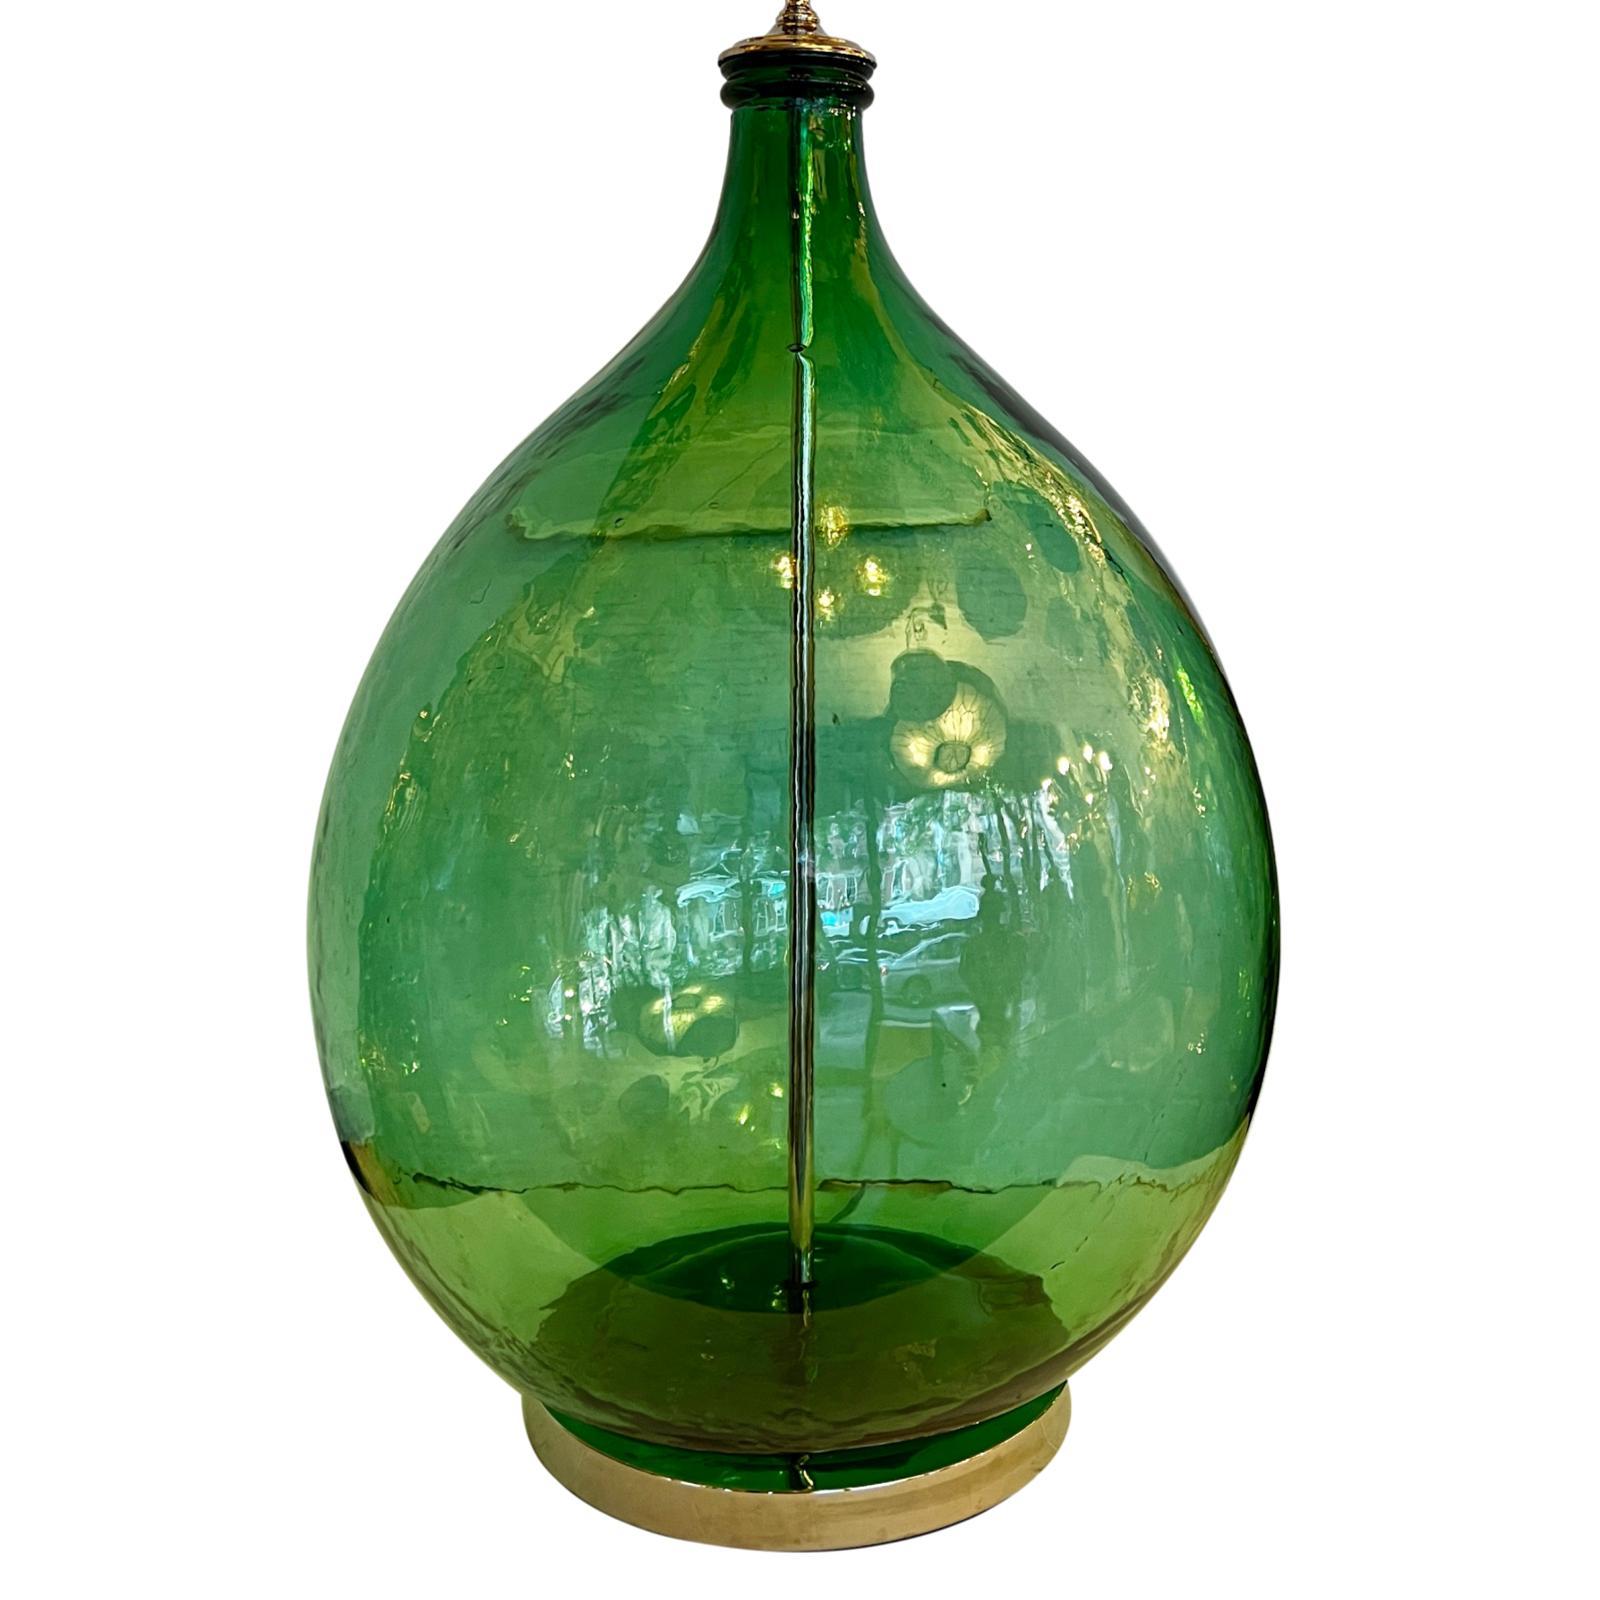 A pair of large circa 1930s Italian blown glass bottle table lamps.

Measurements:
Height of body: 27